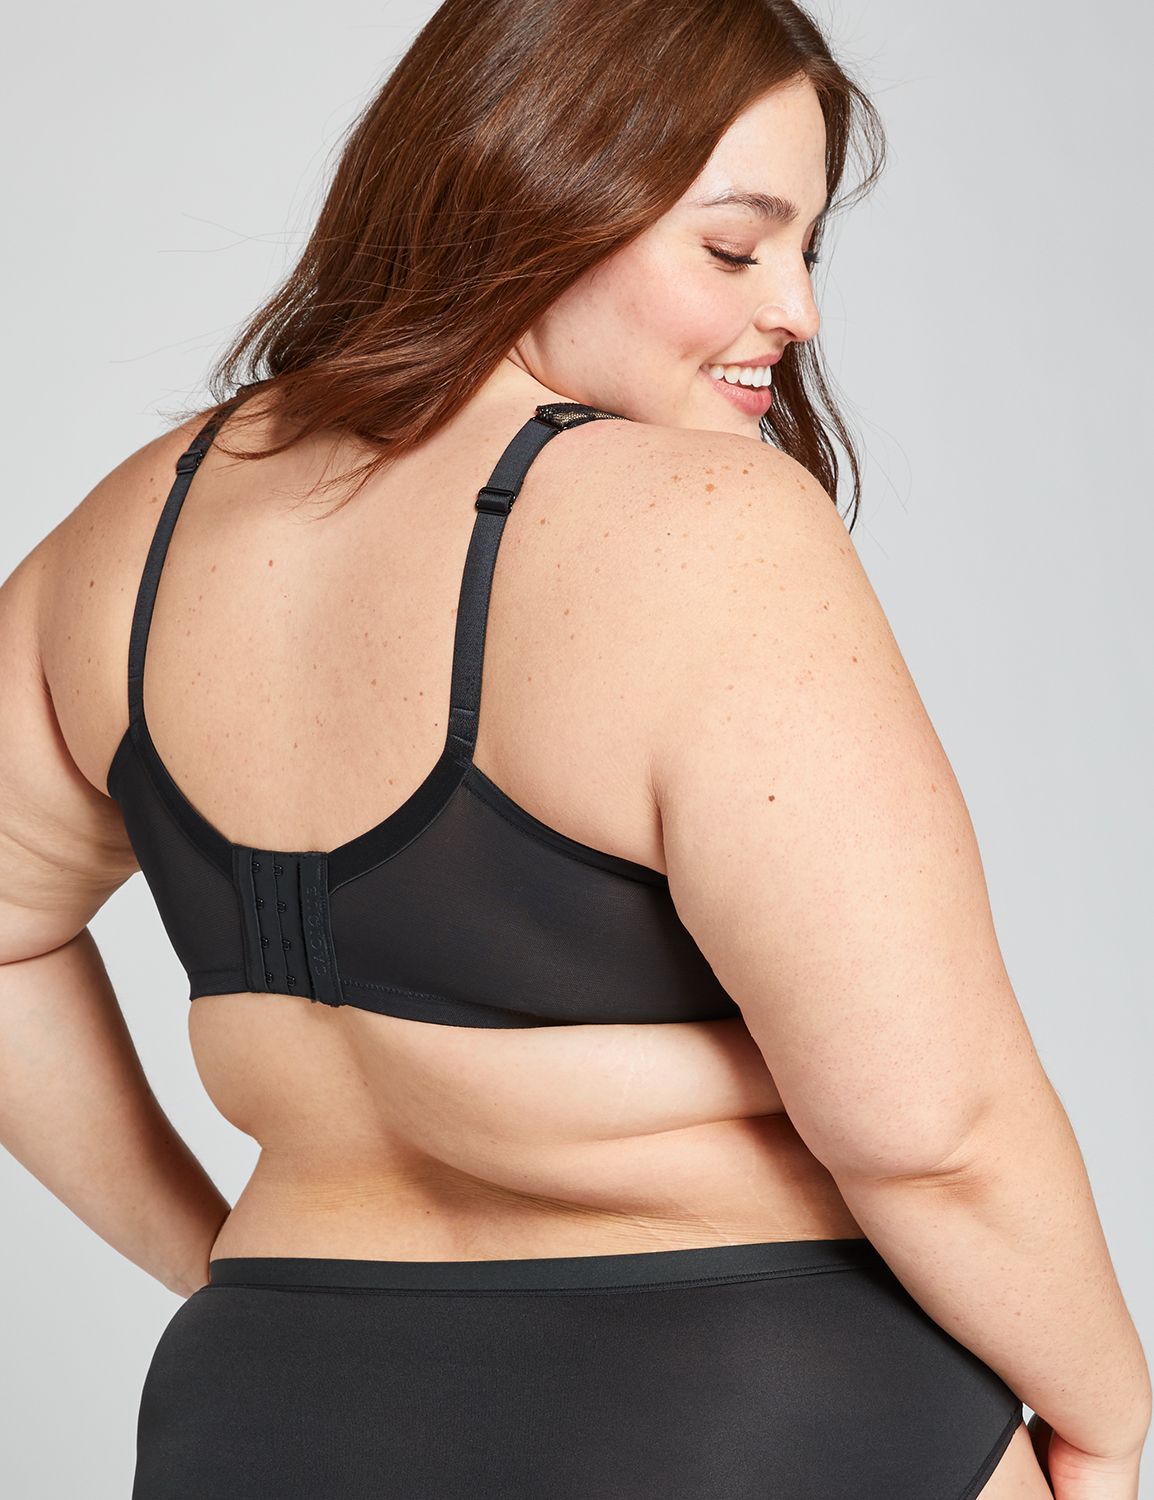 CACIQUE $50 THE Cooling French Full Coverage Bra Lane Bryant Black 36DDD  42F 40G $22.99 - PicClick